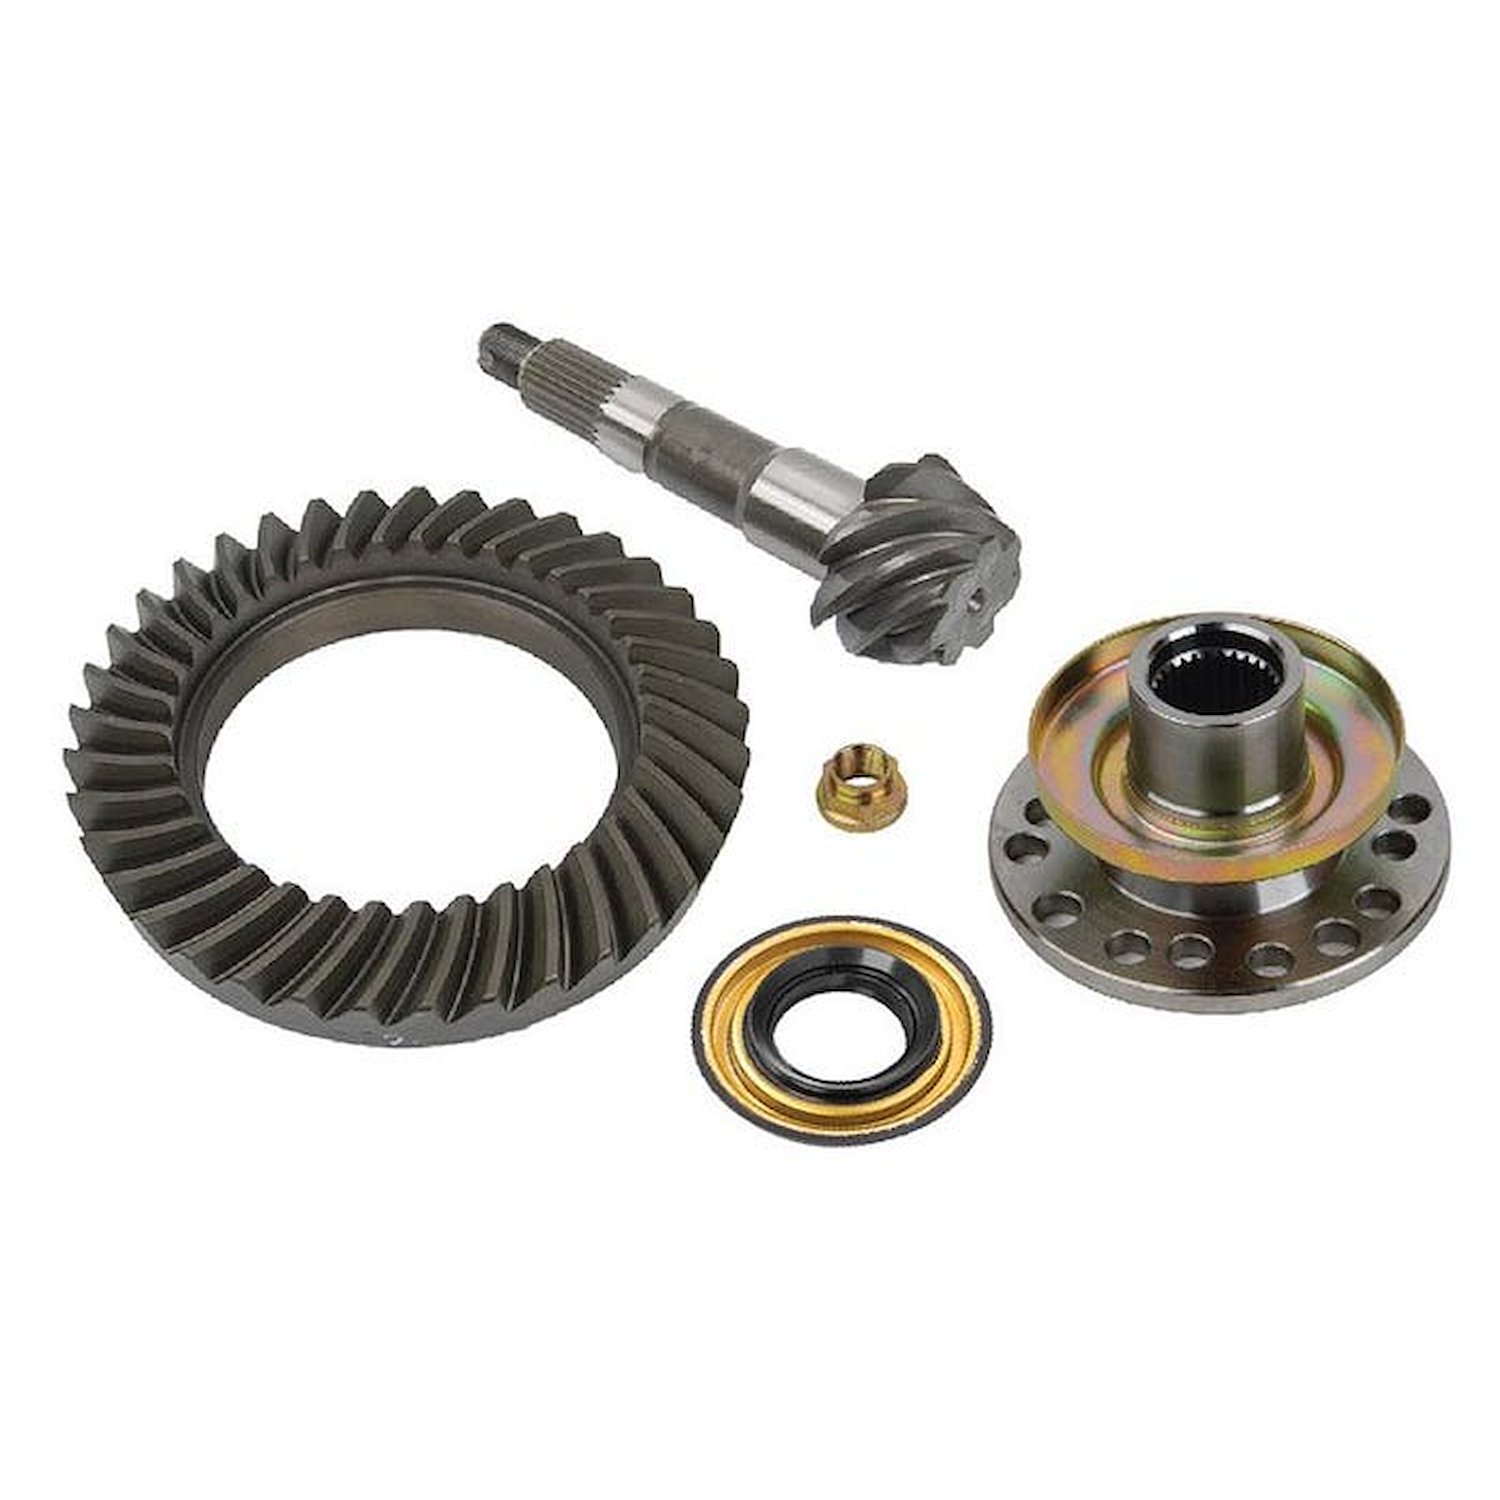 304252-1-KIT Ring And Pinion, 4.88 V6 29-Spline With Flange Kit